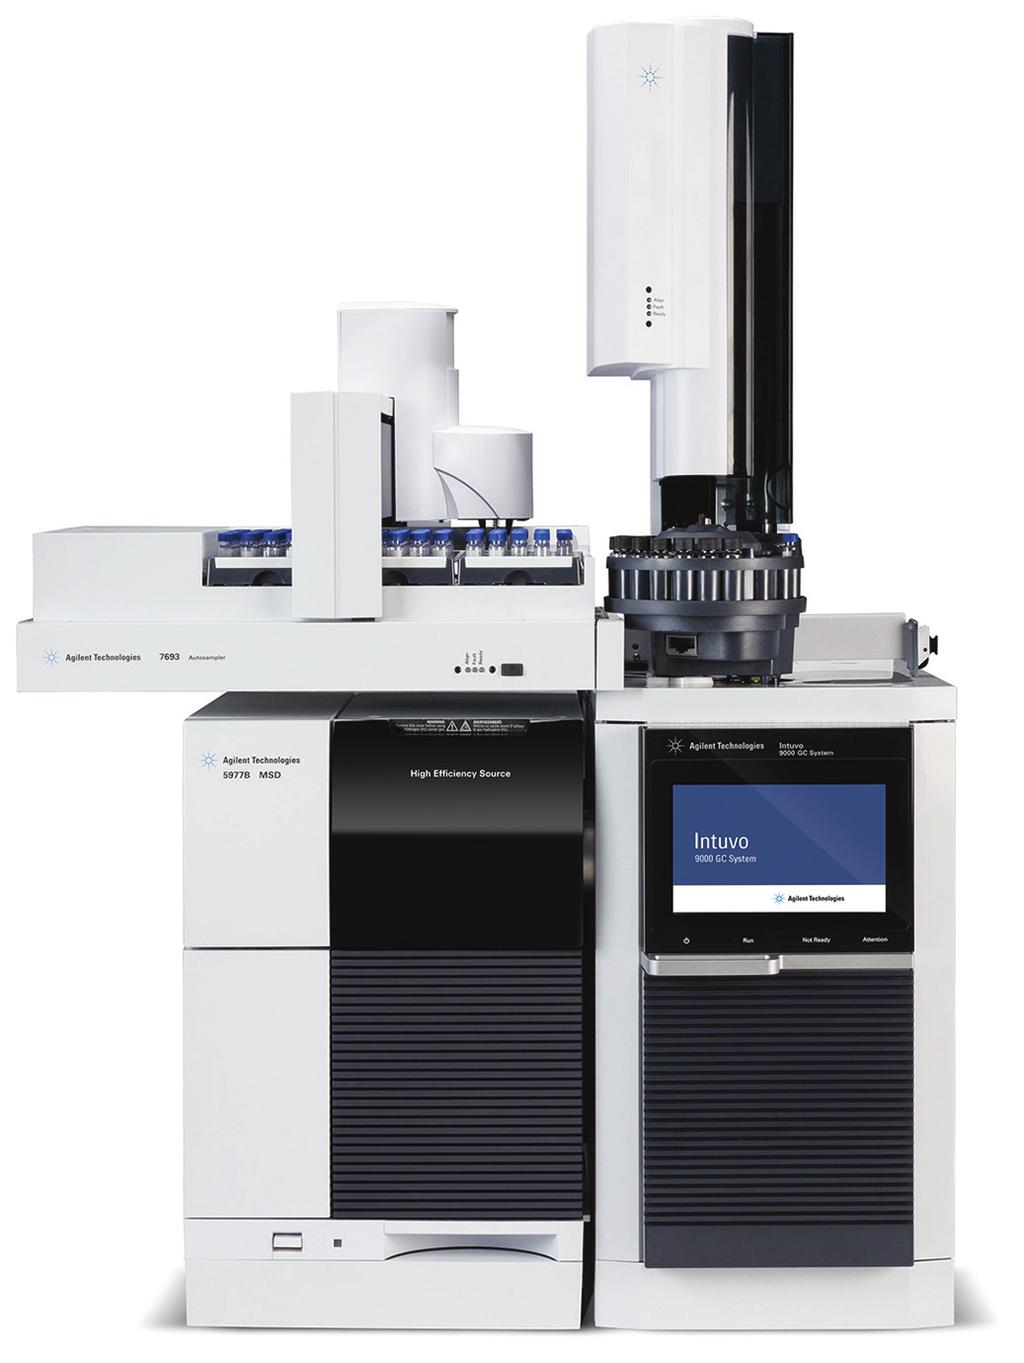 AGILENT 7693A SERIES AUTOMATIC LIQUID SAMPLER A powerful combination of productivity and flexibility It is no surprise that GC and GC/MS precision begins with the autosampler.